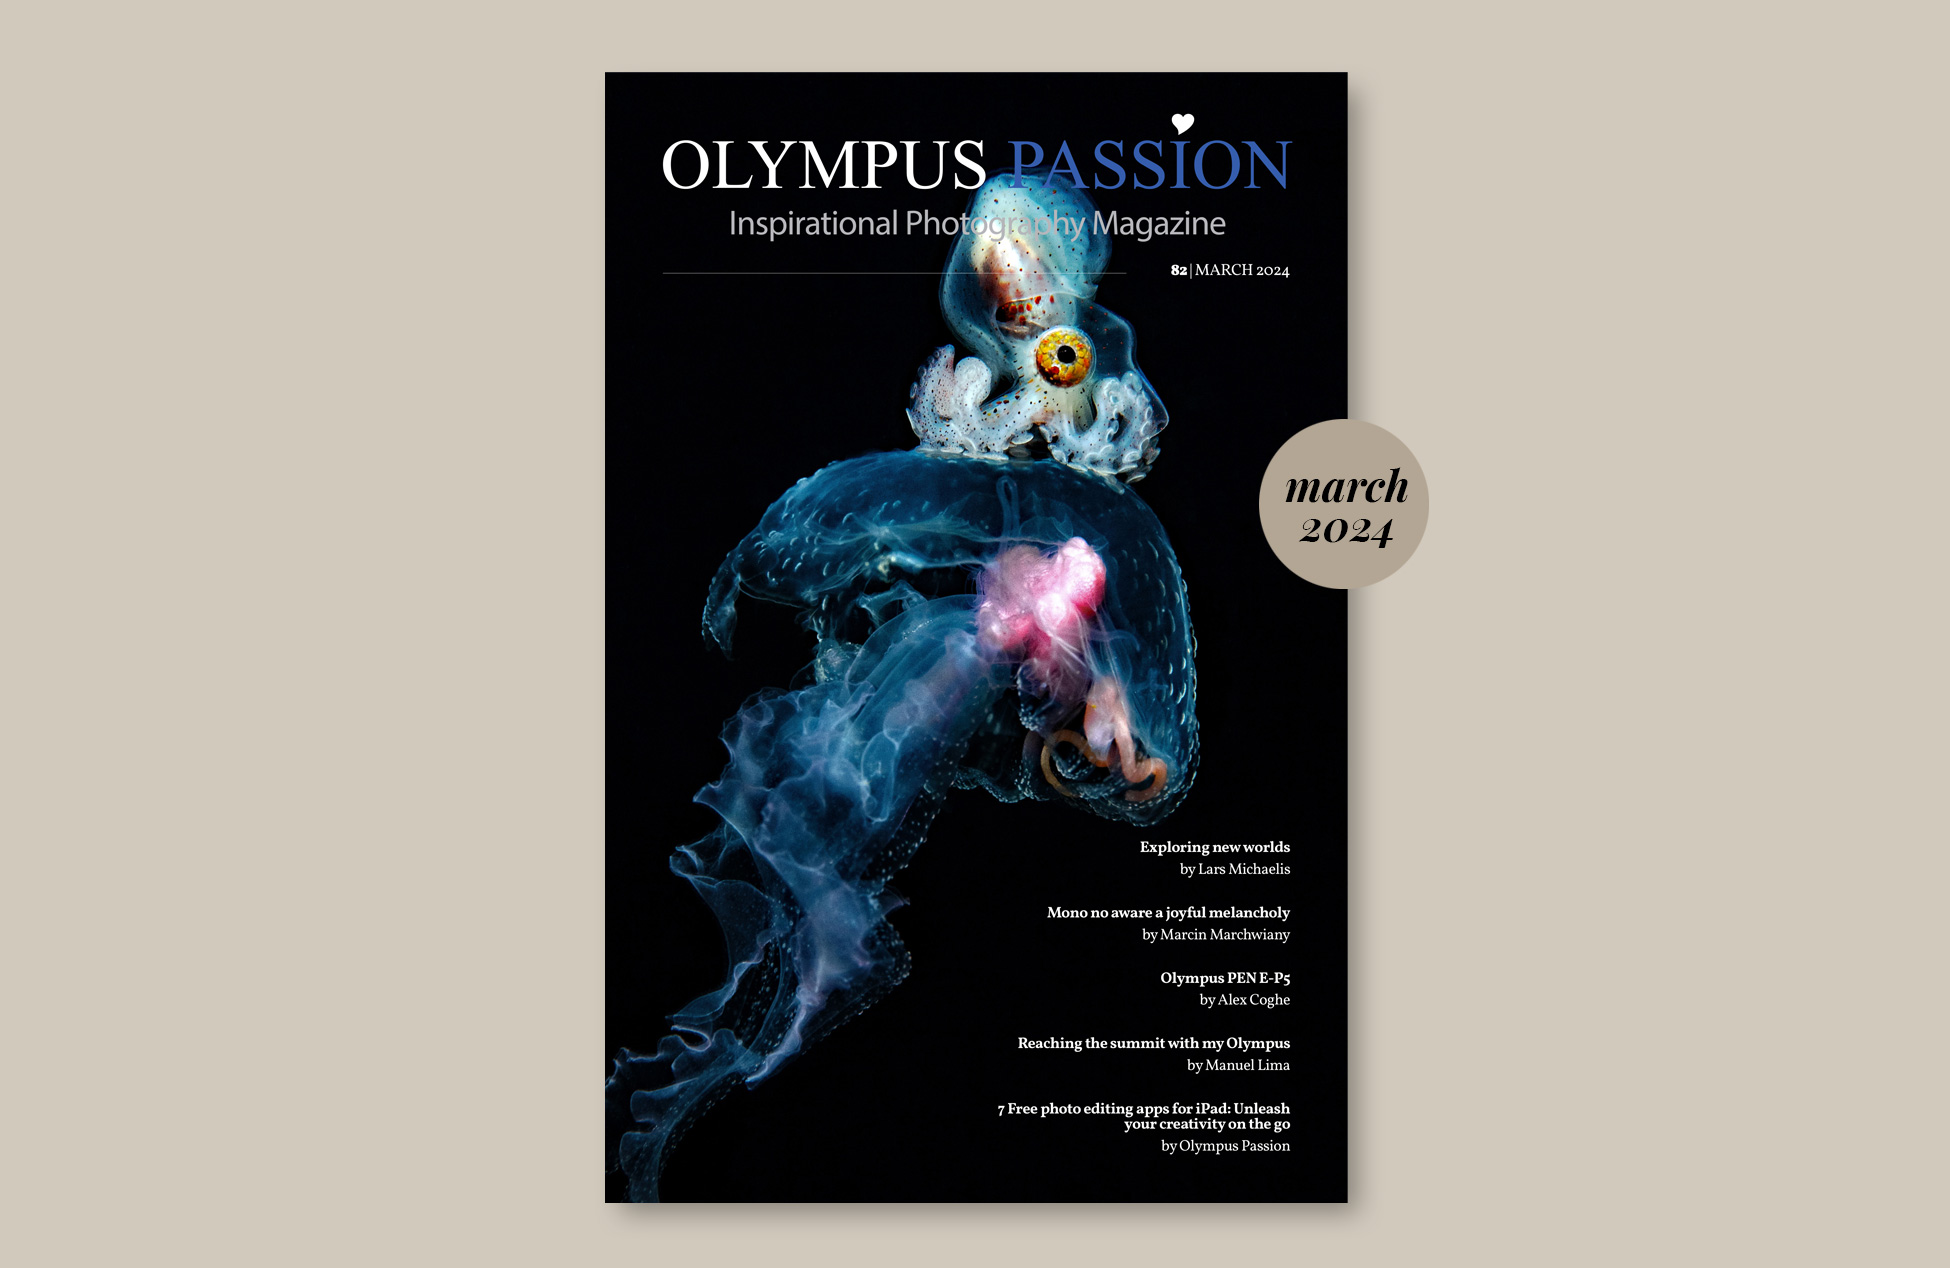 Olympus Passion Photography Magazine – March 2024!